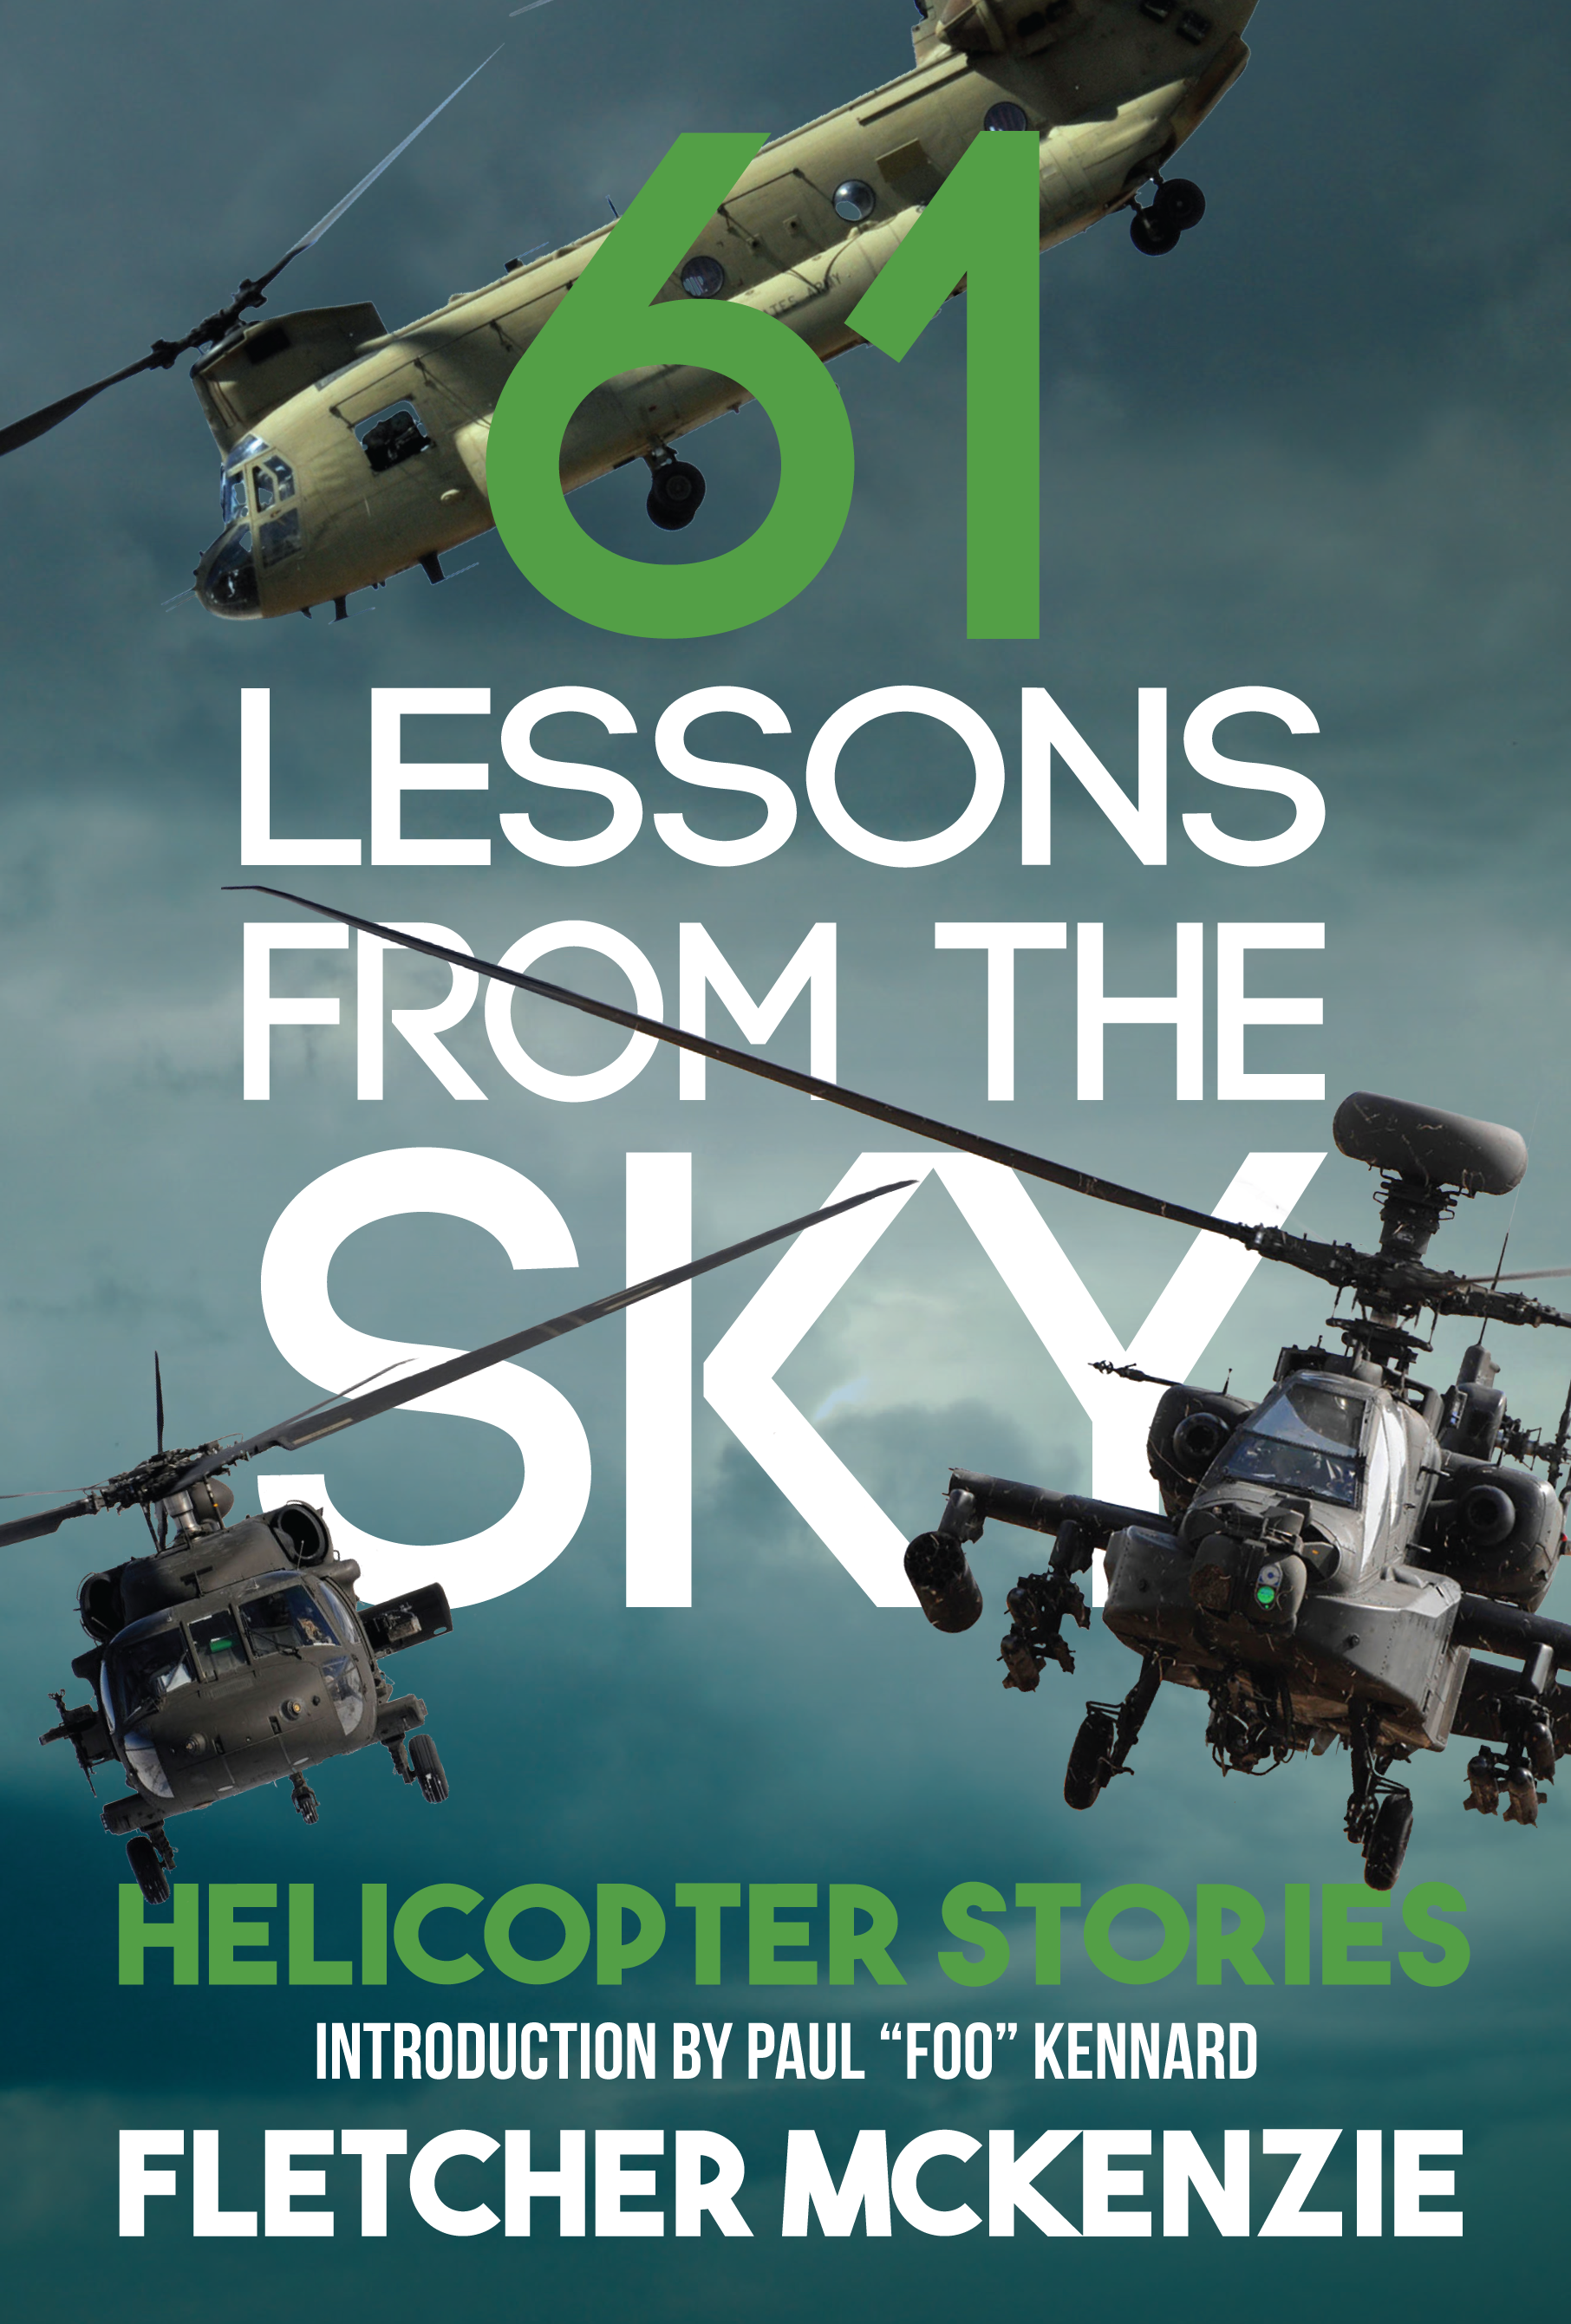 61 Lessons Helicopter Cover-AmazonNov2020-01.png